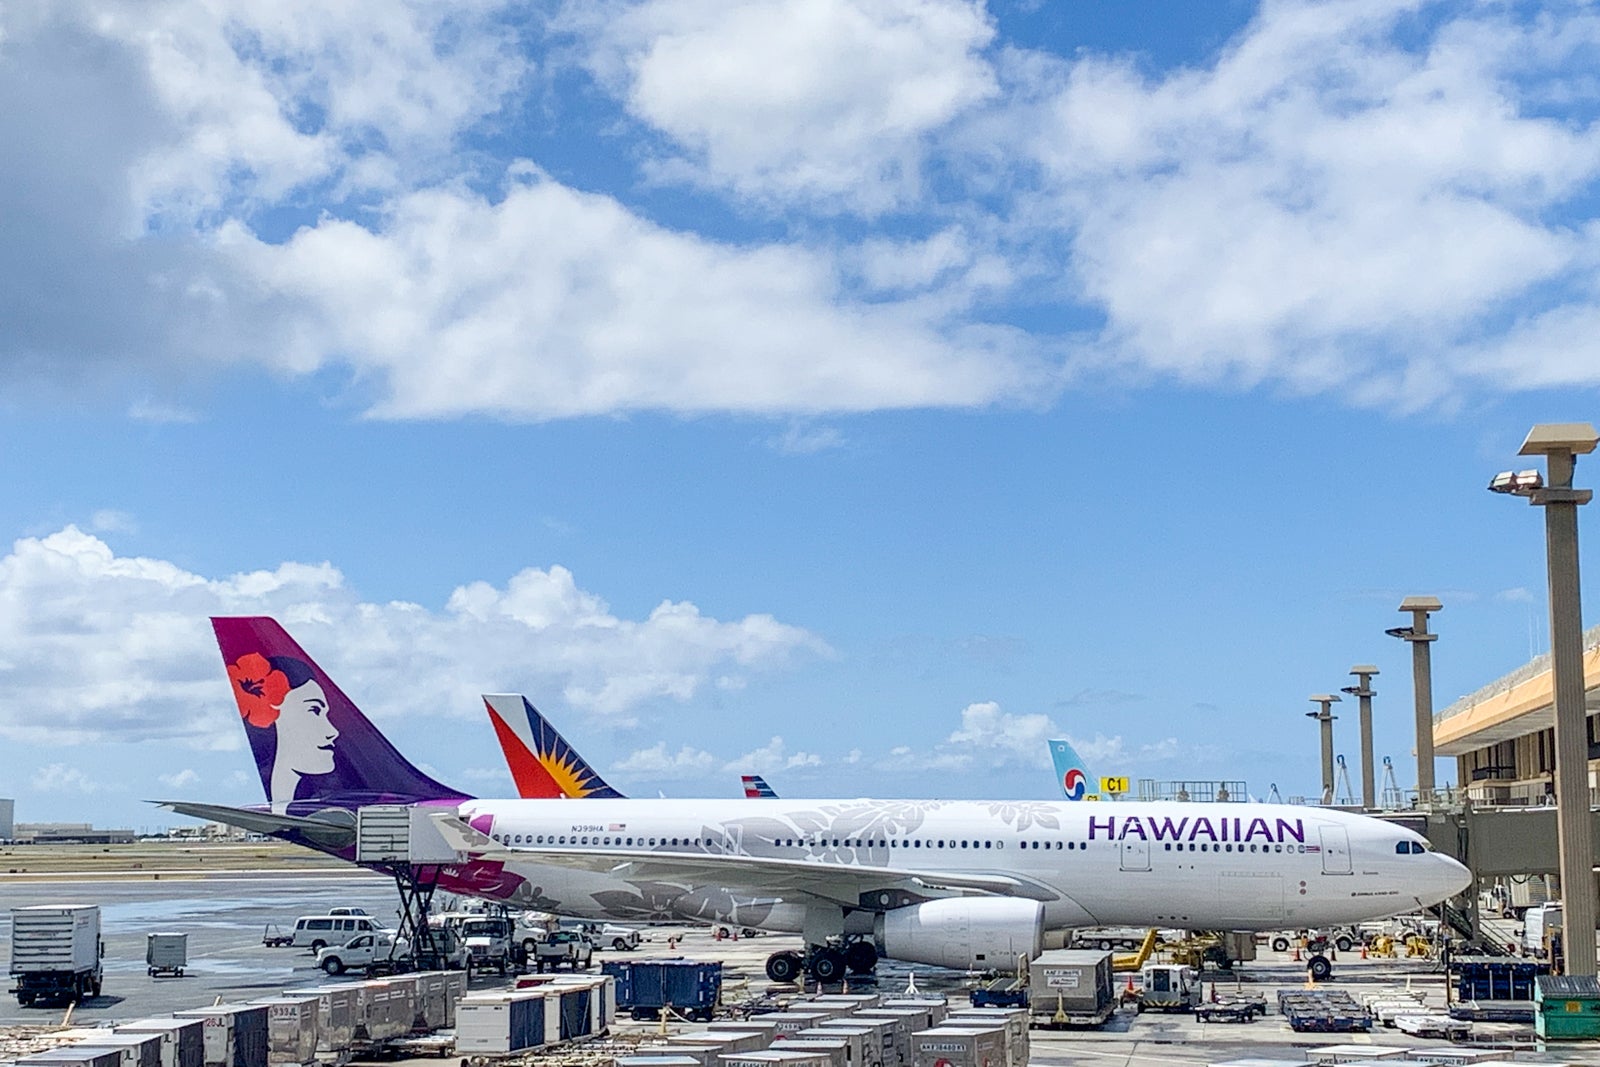 Honolulu Airport March 2022. (Photo by Clint Henderson/The Points Guy)